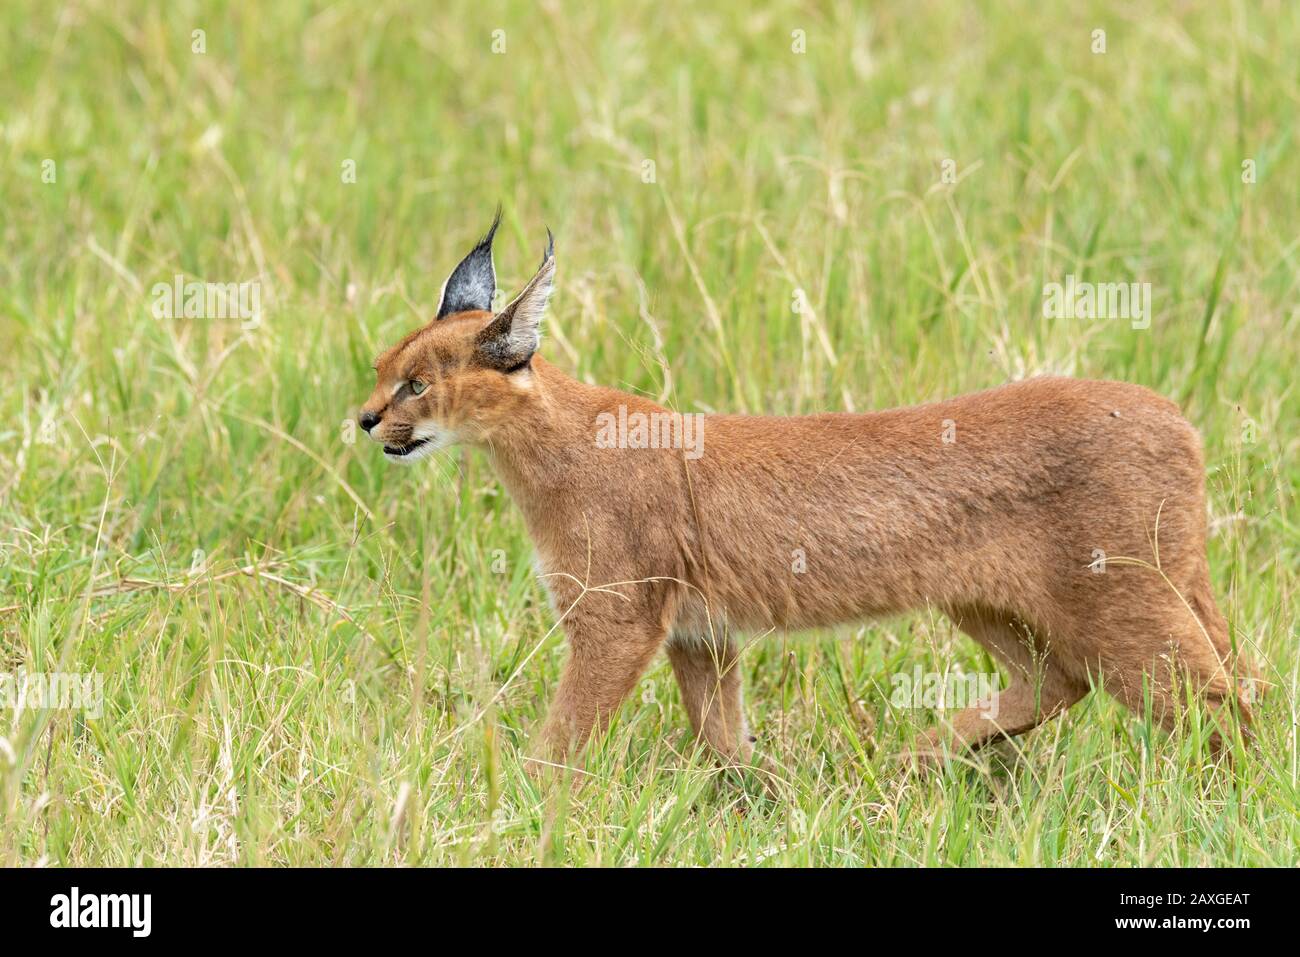 The shy and often elusive Caracal cat, spotted in the EUNSECO listed Ngorongoro Crater Conservation Area.1 of 4 images in the series. Stock Photo